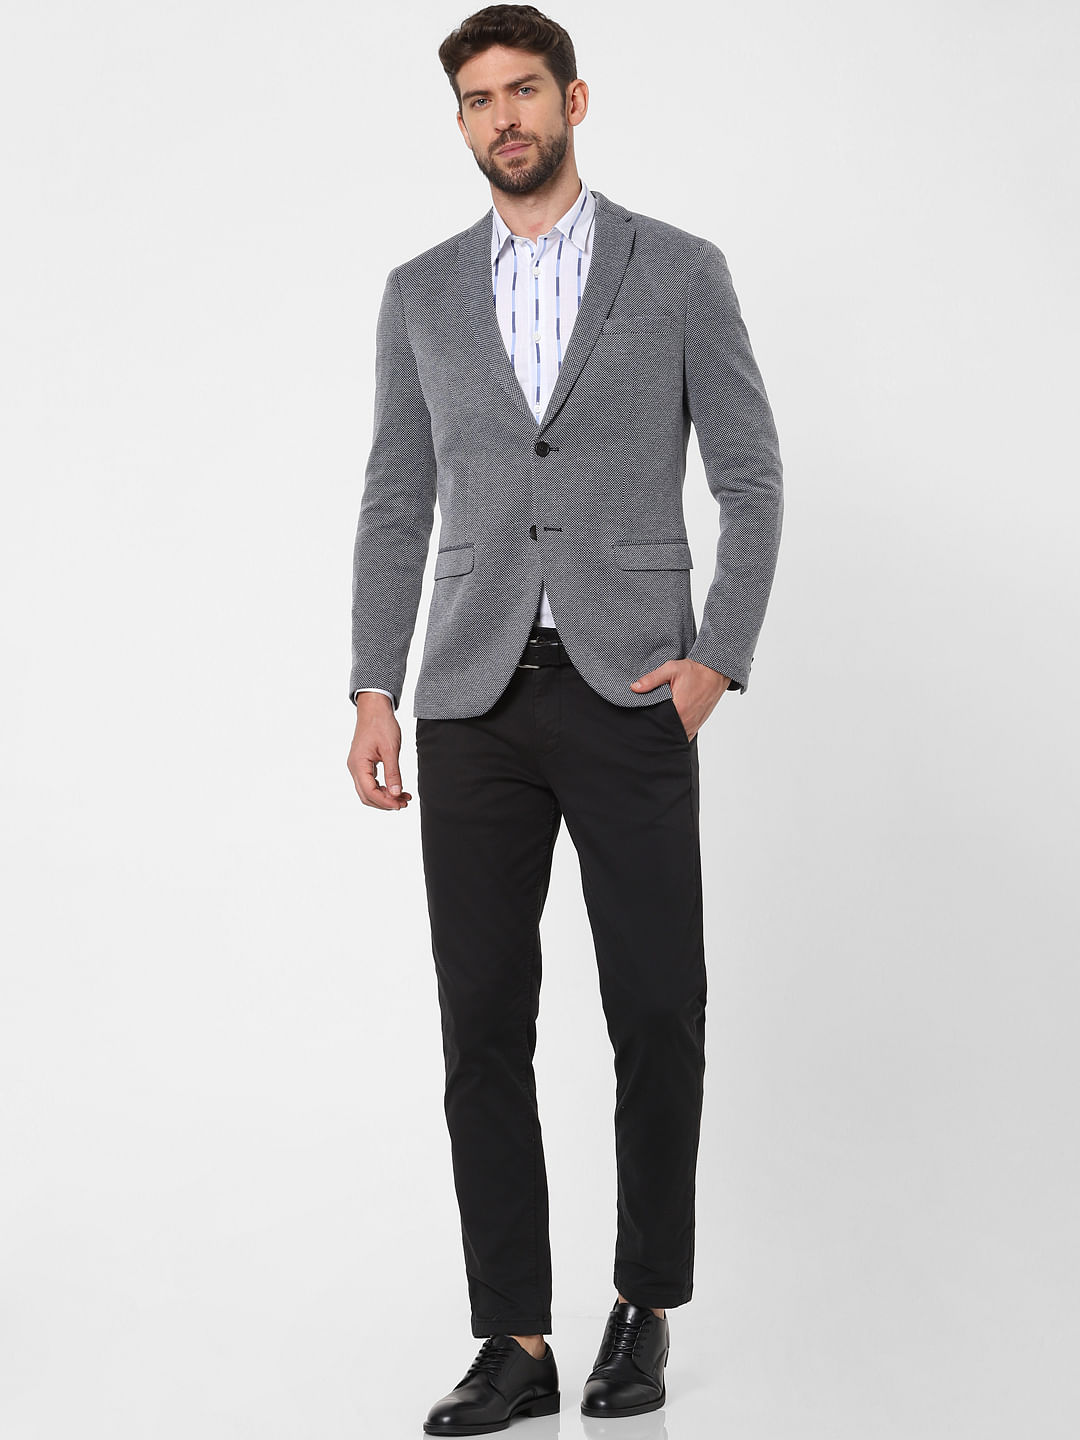 Fashion Grey Colour Men`S Business Suits Jacket Blazer Dress Pants Vest  Formal Uniform Suits - China Coat and Clothing price | Made-in-China.com